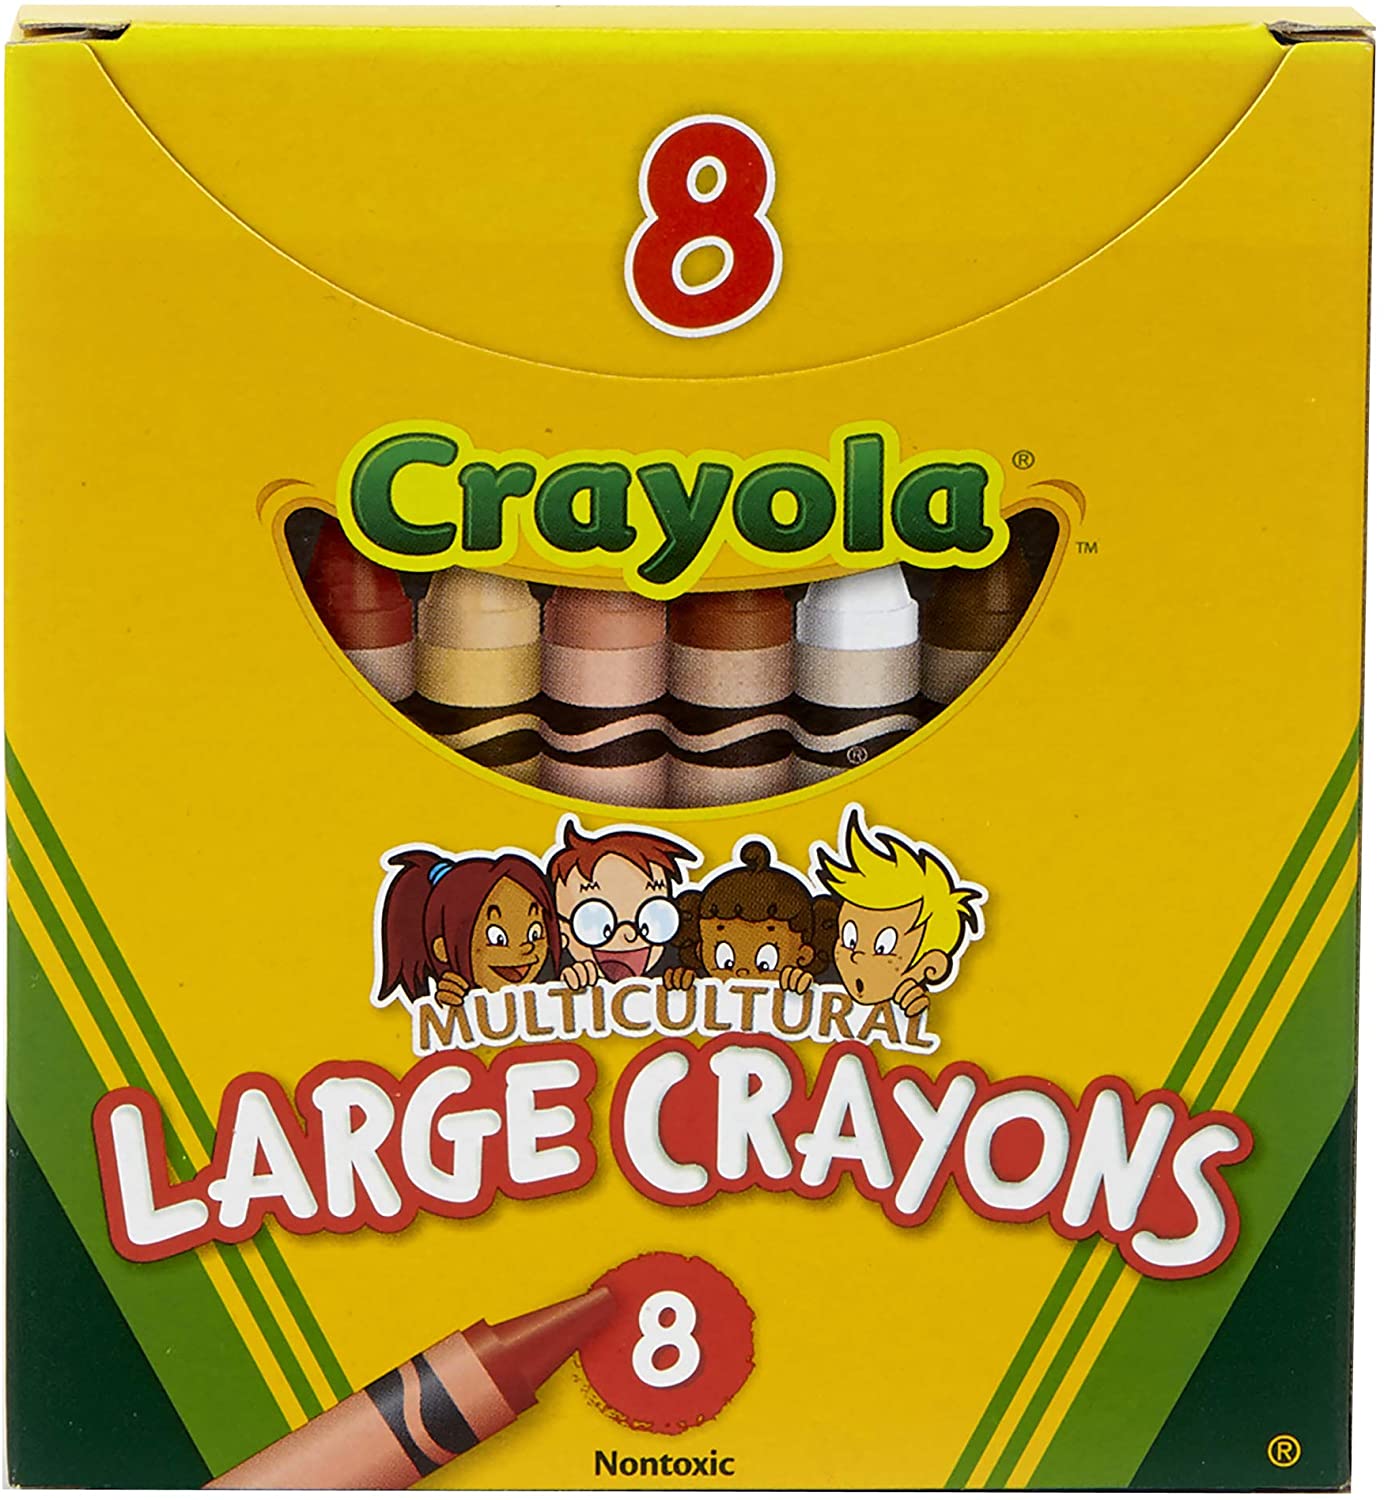 Crayola Multi-Cultural Crayons, Large, 7/16 x 4 Inches, Assorted Skin Tone Colors, Pack of 8